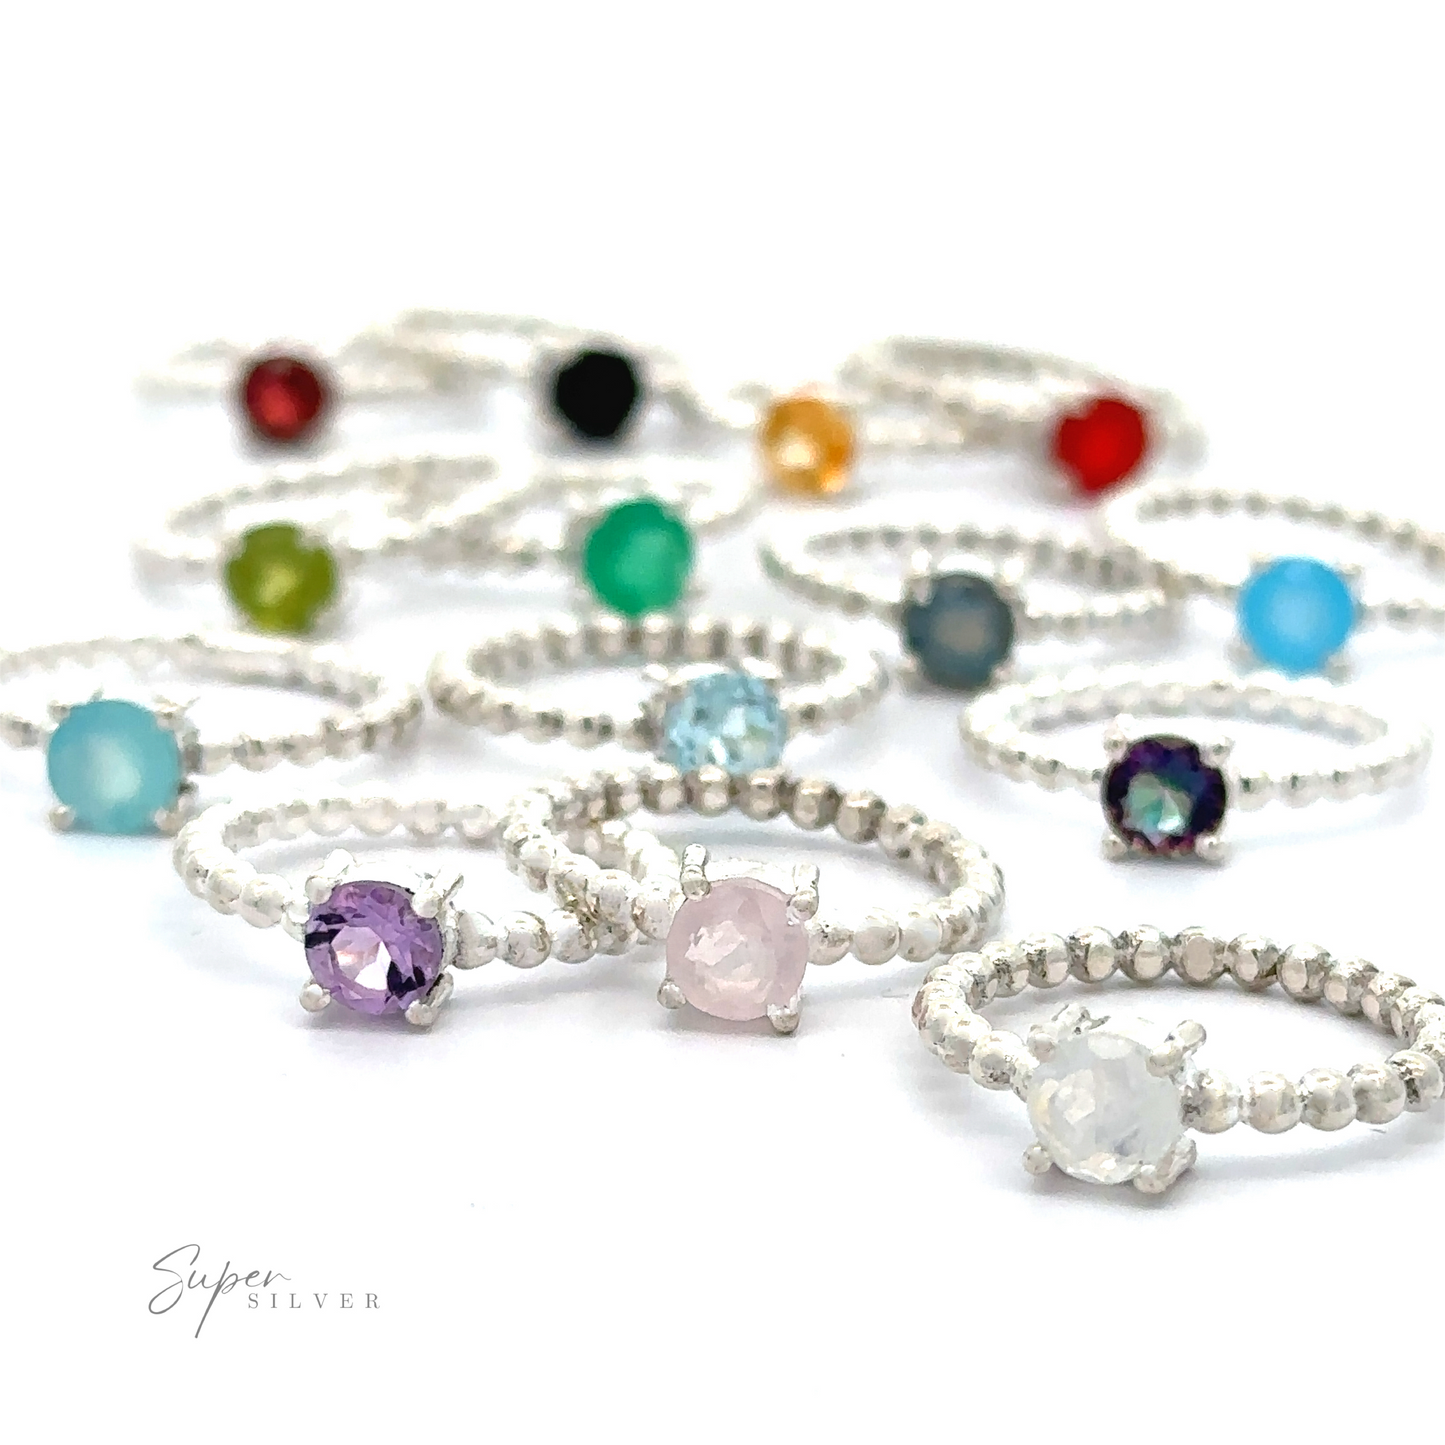 An assortment of Stunning Circular Gemstone Rings with Beaded Bands displayed against a white background.